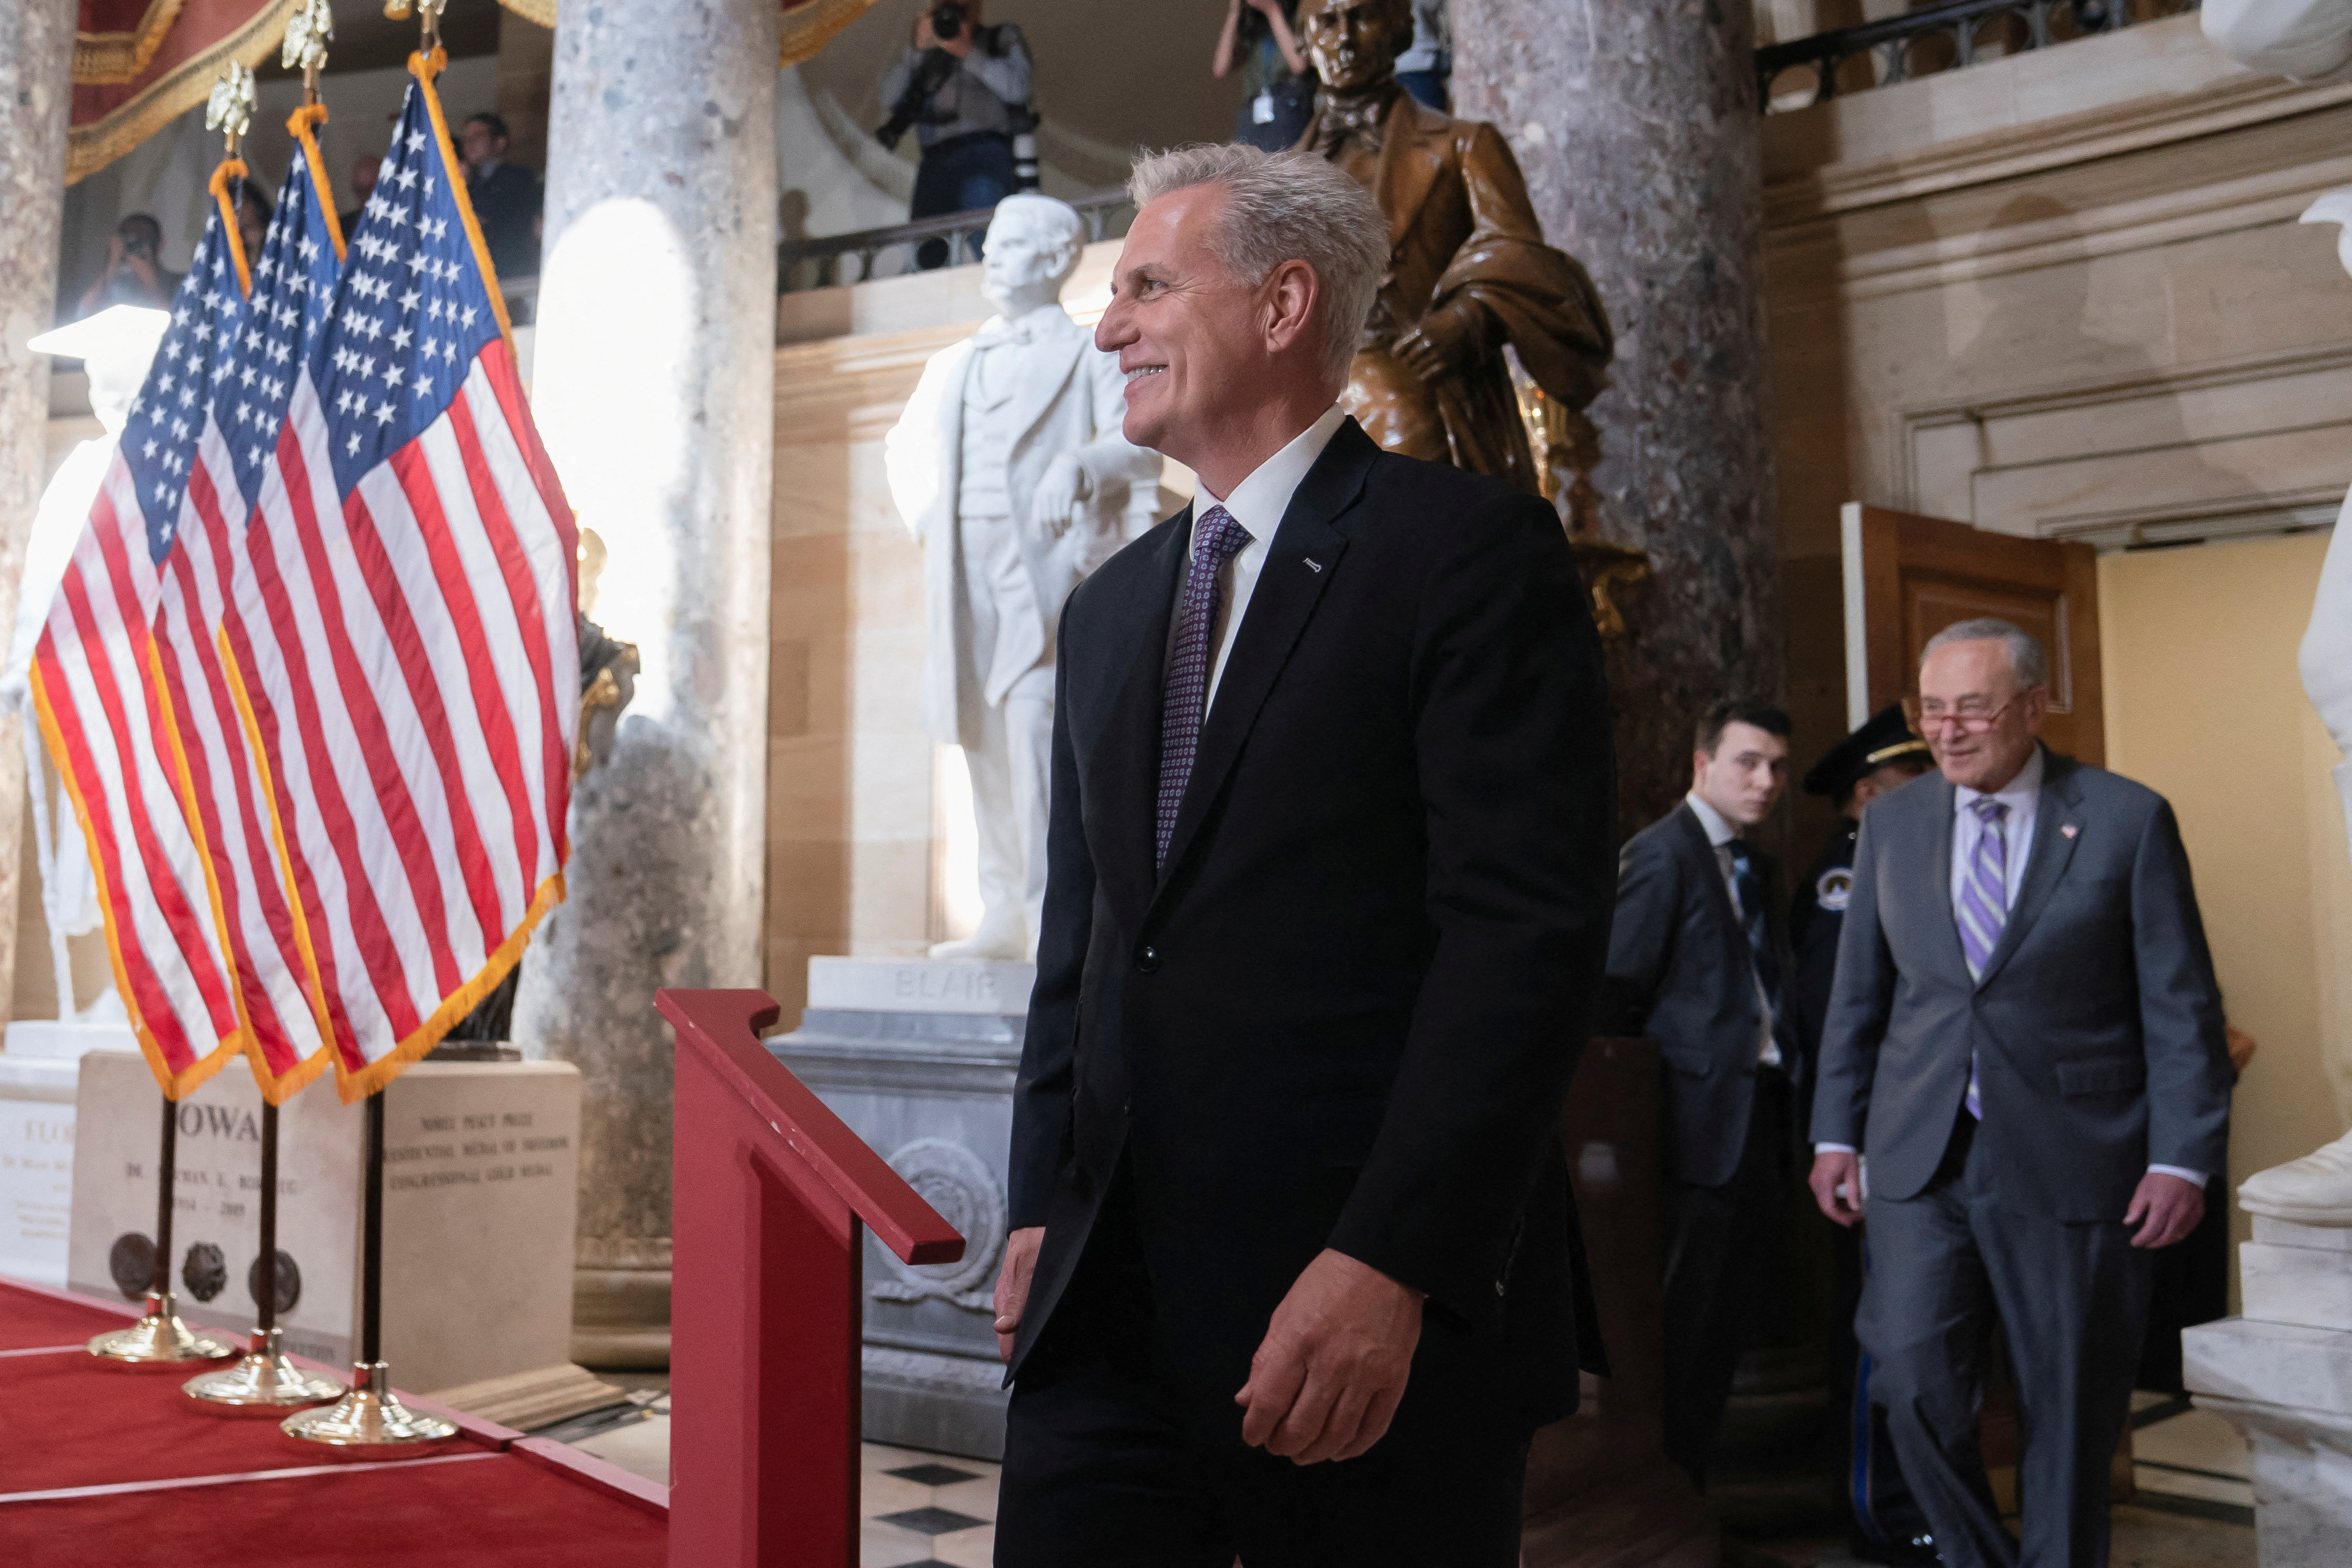 Portrait unveiling ceremony on Capitol Hill in Washington